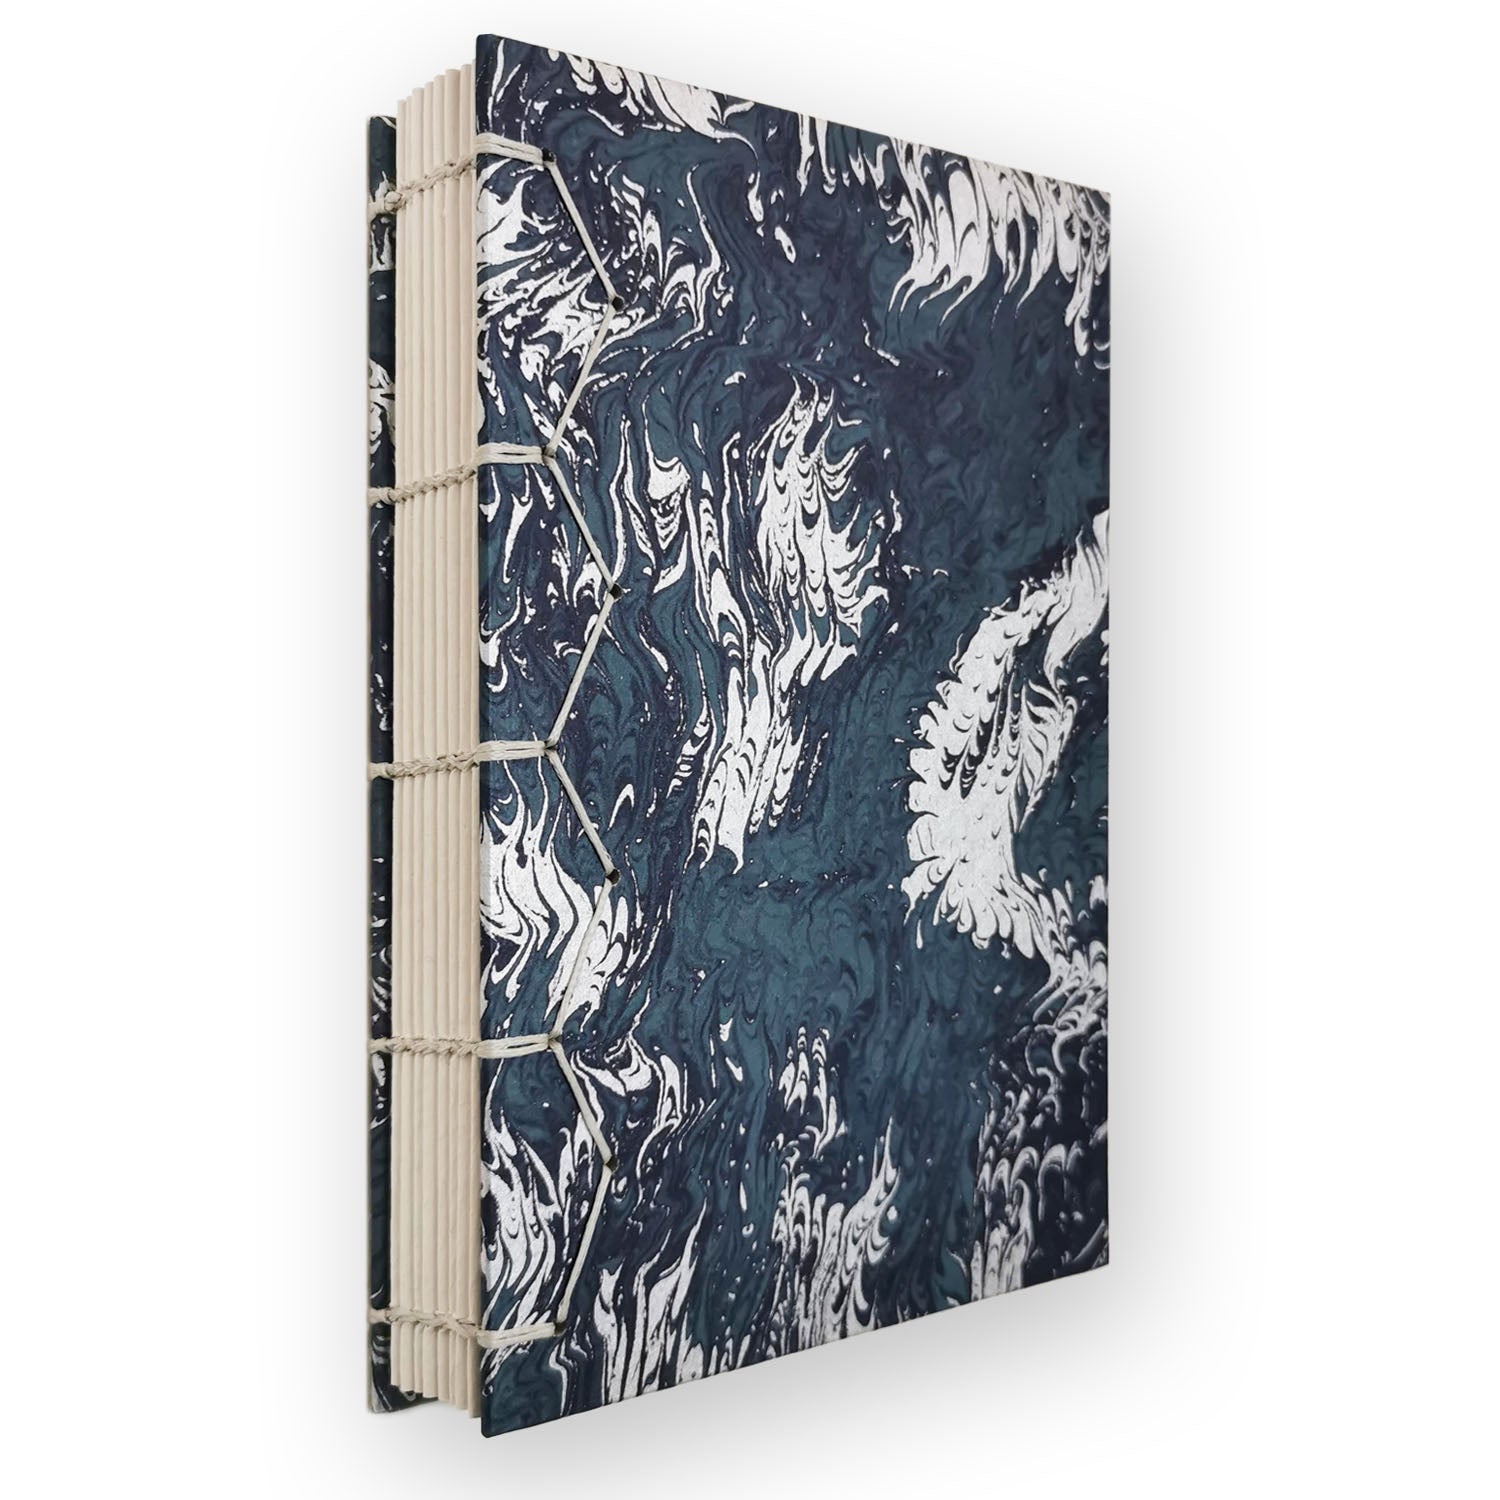 Handmade Notebook with Byzantine Binding - Blue Silver Marble Art